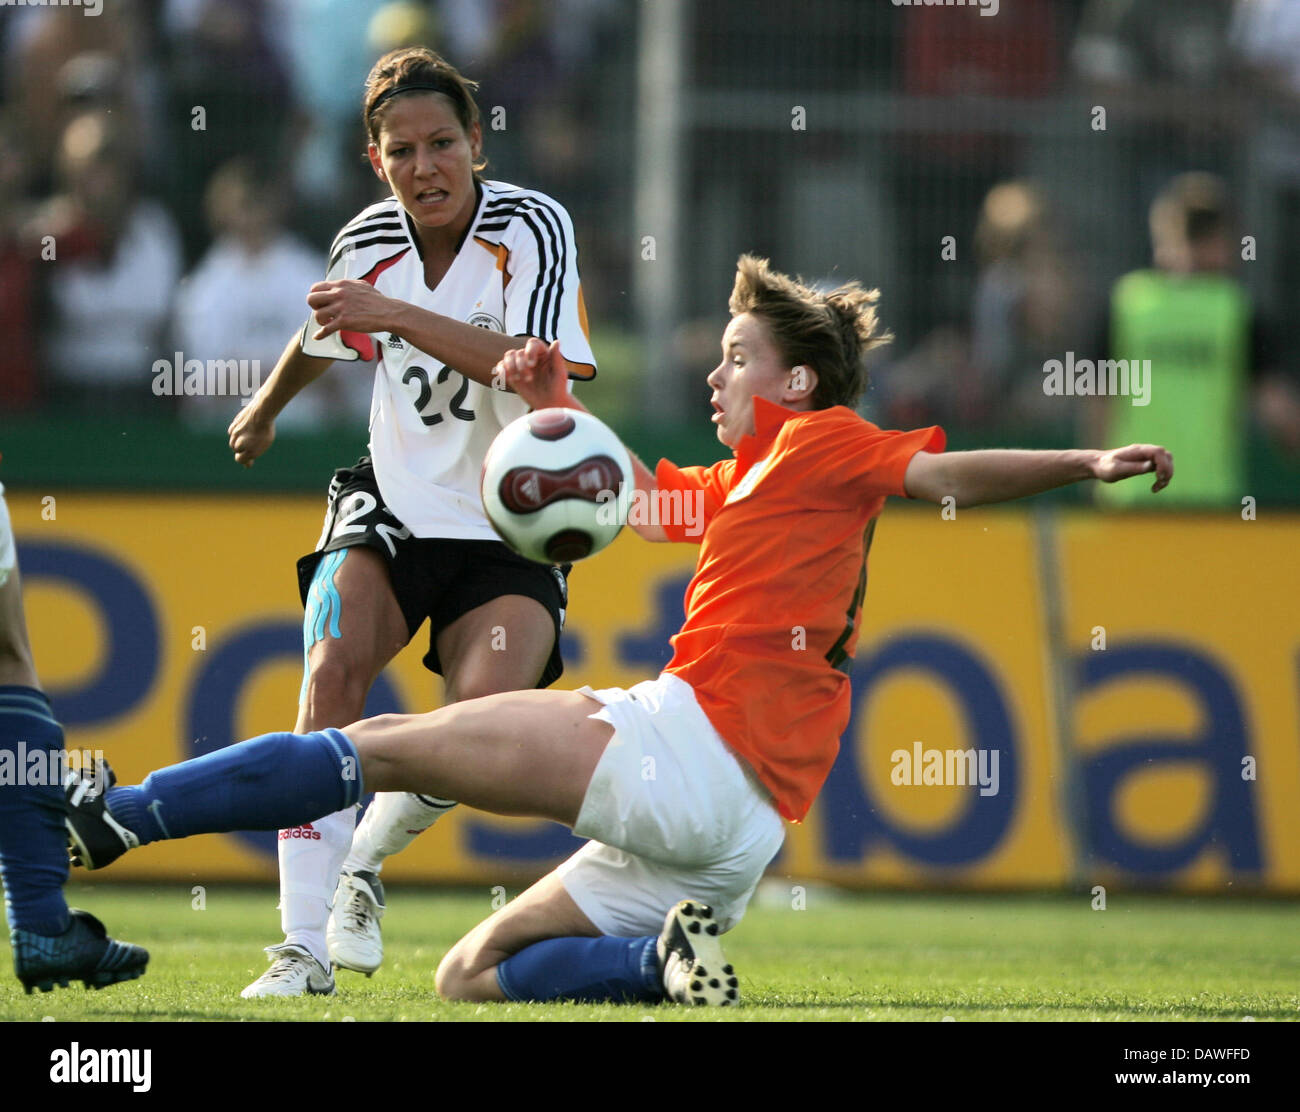 German international Linda Brsonik (L) and Dutch Karin Legemate (R) vie for the ball during the Women's Euro qualifier Germany v Netherlands at the Lohrheide stadium of Bochum, Germany, Thursday 12 April 2007. Germany defeated the Netherlands 5-2. Photo: Franz-Peter Tschauner Stock Photo